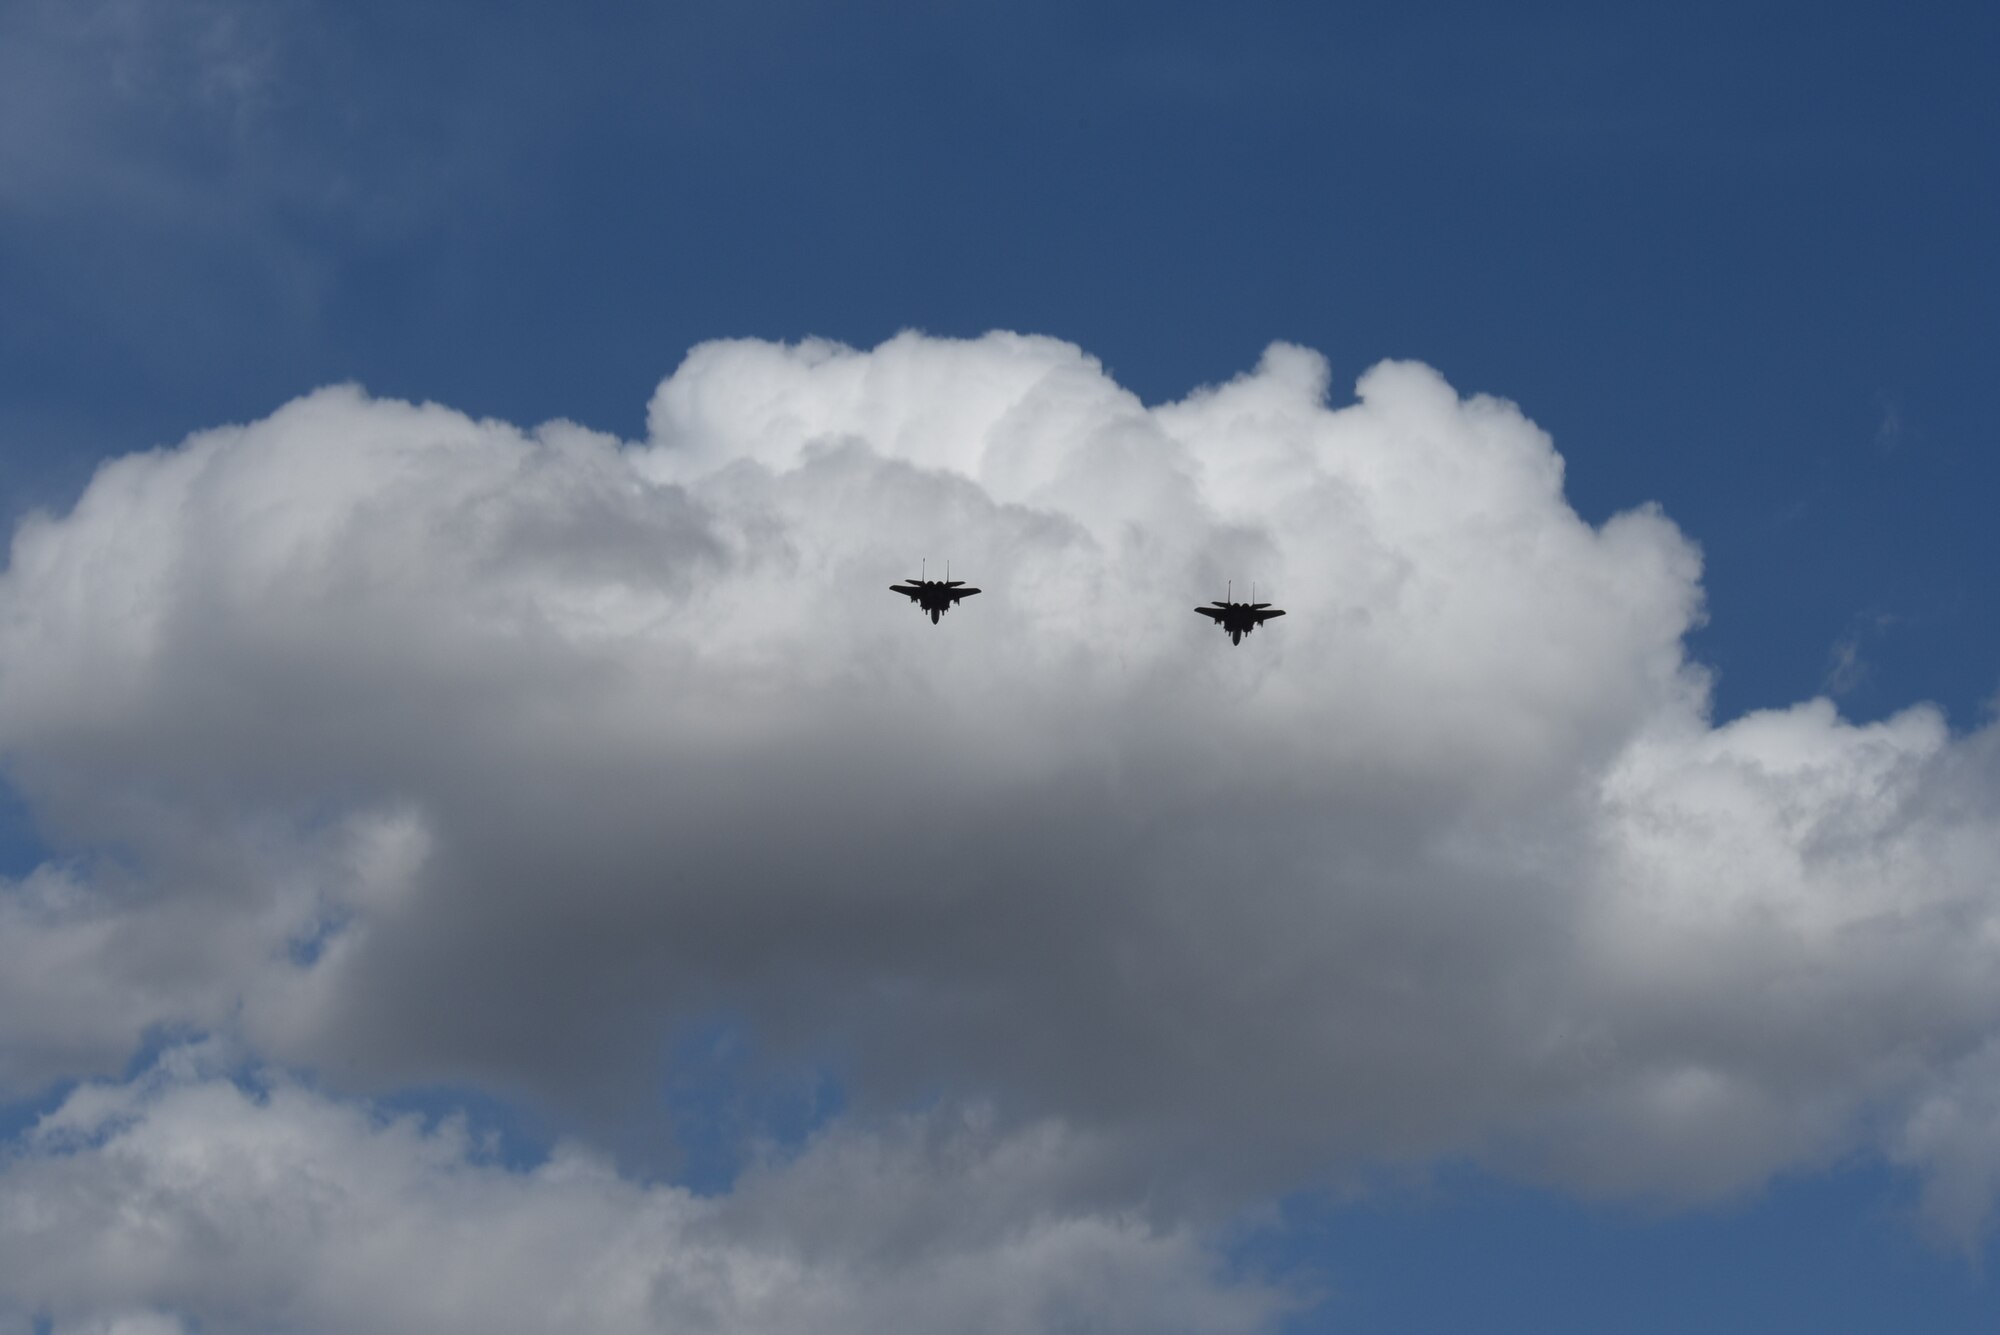 Two F-15E Strike Eagles perform a fly over during a Freedom Classic baseball series game, Feb. 25, 2017, at Grainger Stadium in Kinston, North Carolina. During the game, there was a patriotic ceremony honoring men and women who have served or are currently serving in the military.  (U.S. Air Force photo by Airman Miranda A. Loera)